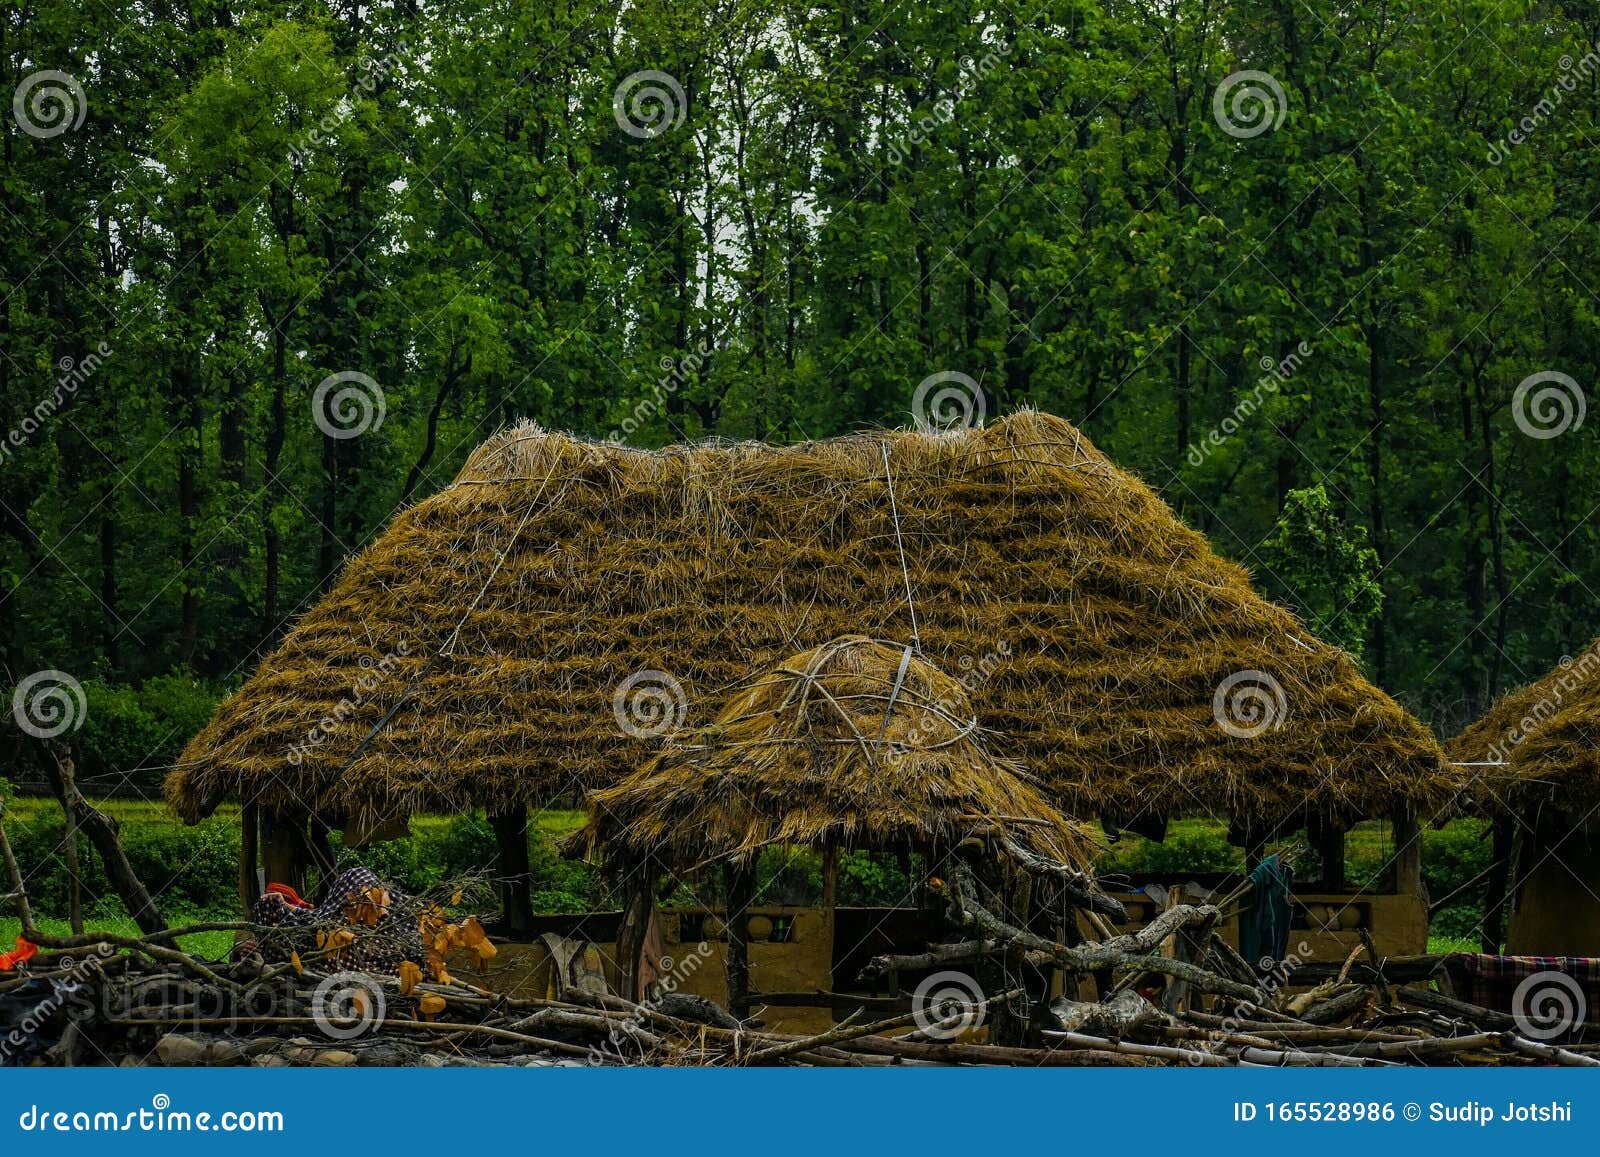 cattle shed/shelter in uttrakhand,india. stock photo